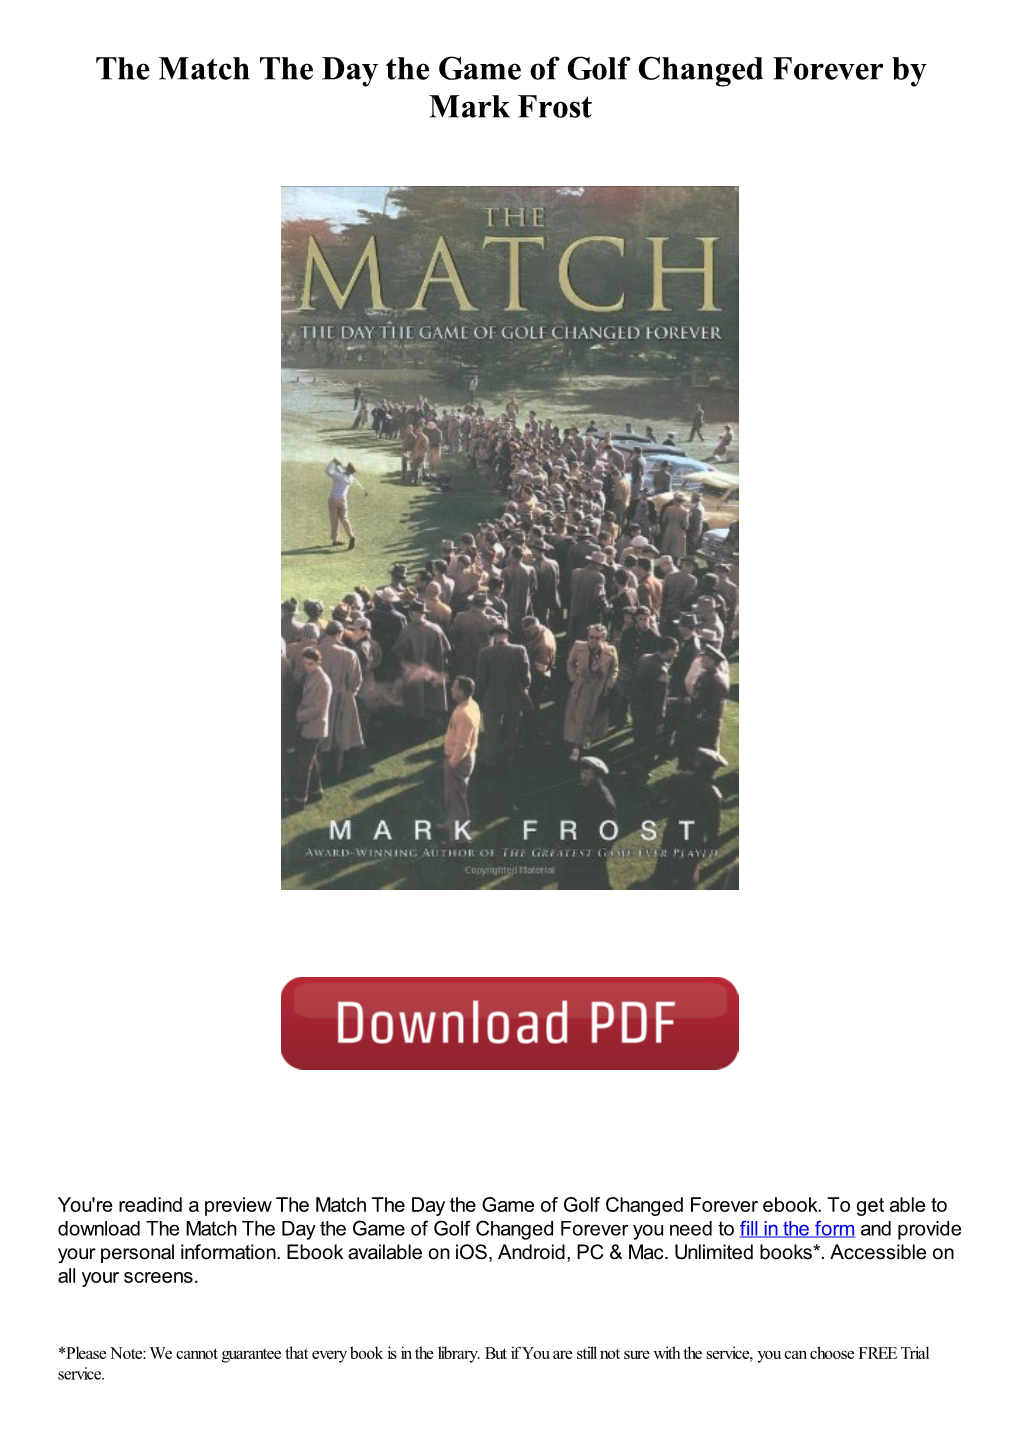 The Match the Day the Game of Golf Changed Forever by Mark Frost